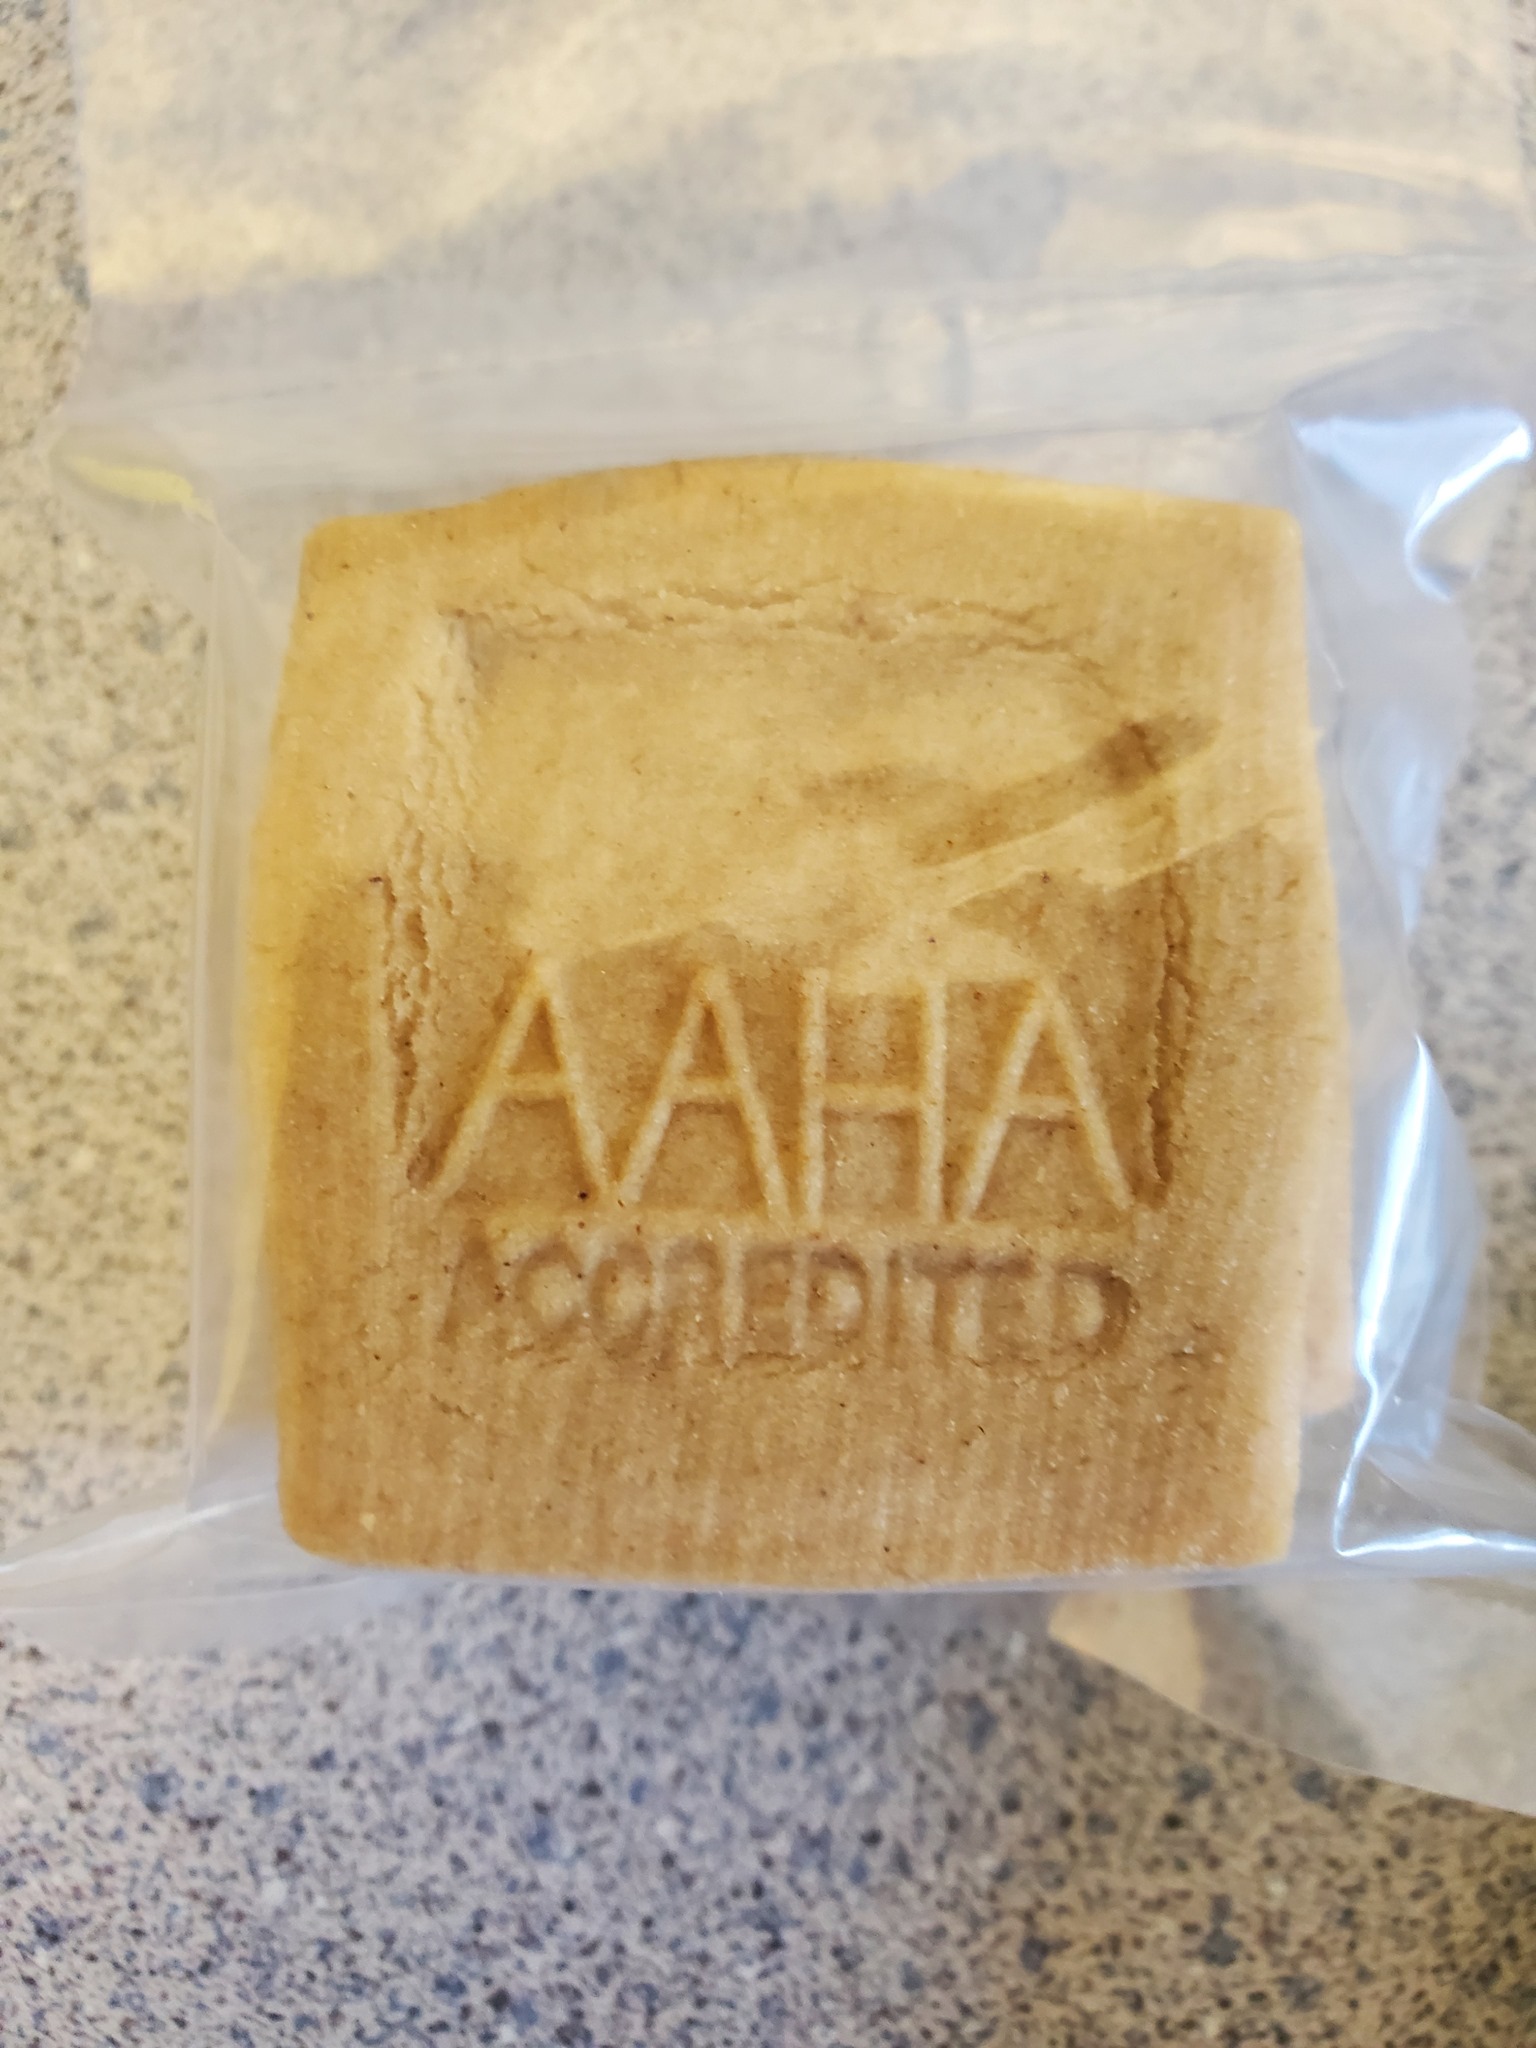 These AAHA-accredited logo shortbread cookies at Skaer Veterinary Clinic look amazing!